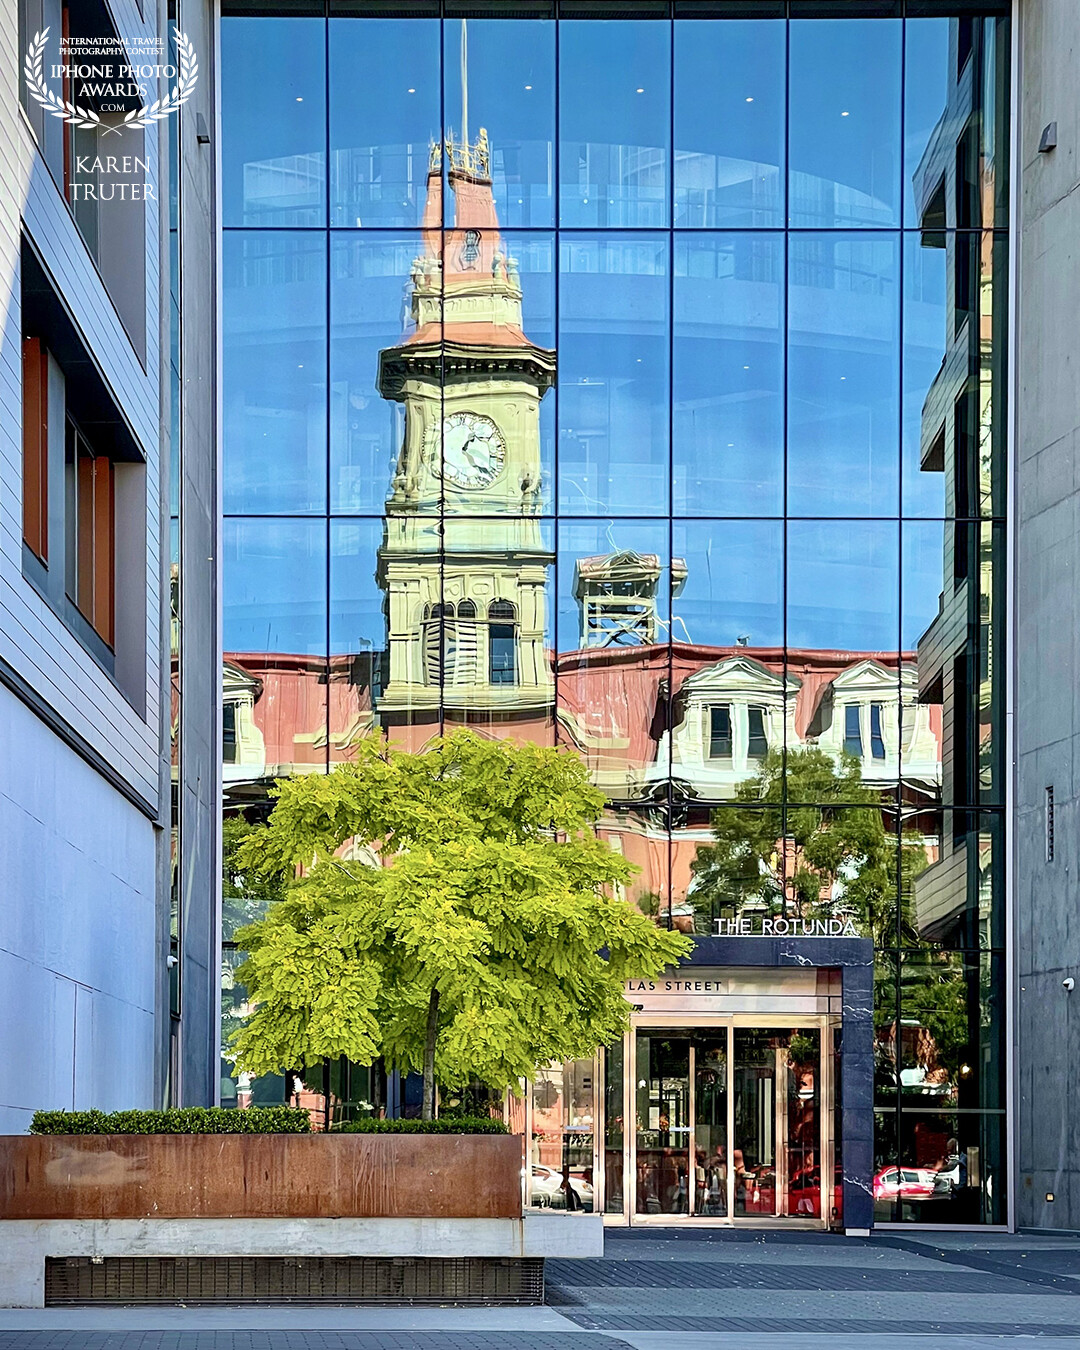 My husband and I were sat at a red stop light beside the Old City Hall, Victoria, British Columbia and across the street was this wonderful reflection in the window of the modern building. I love the juxtaposition of the old and new in this capture.